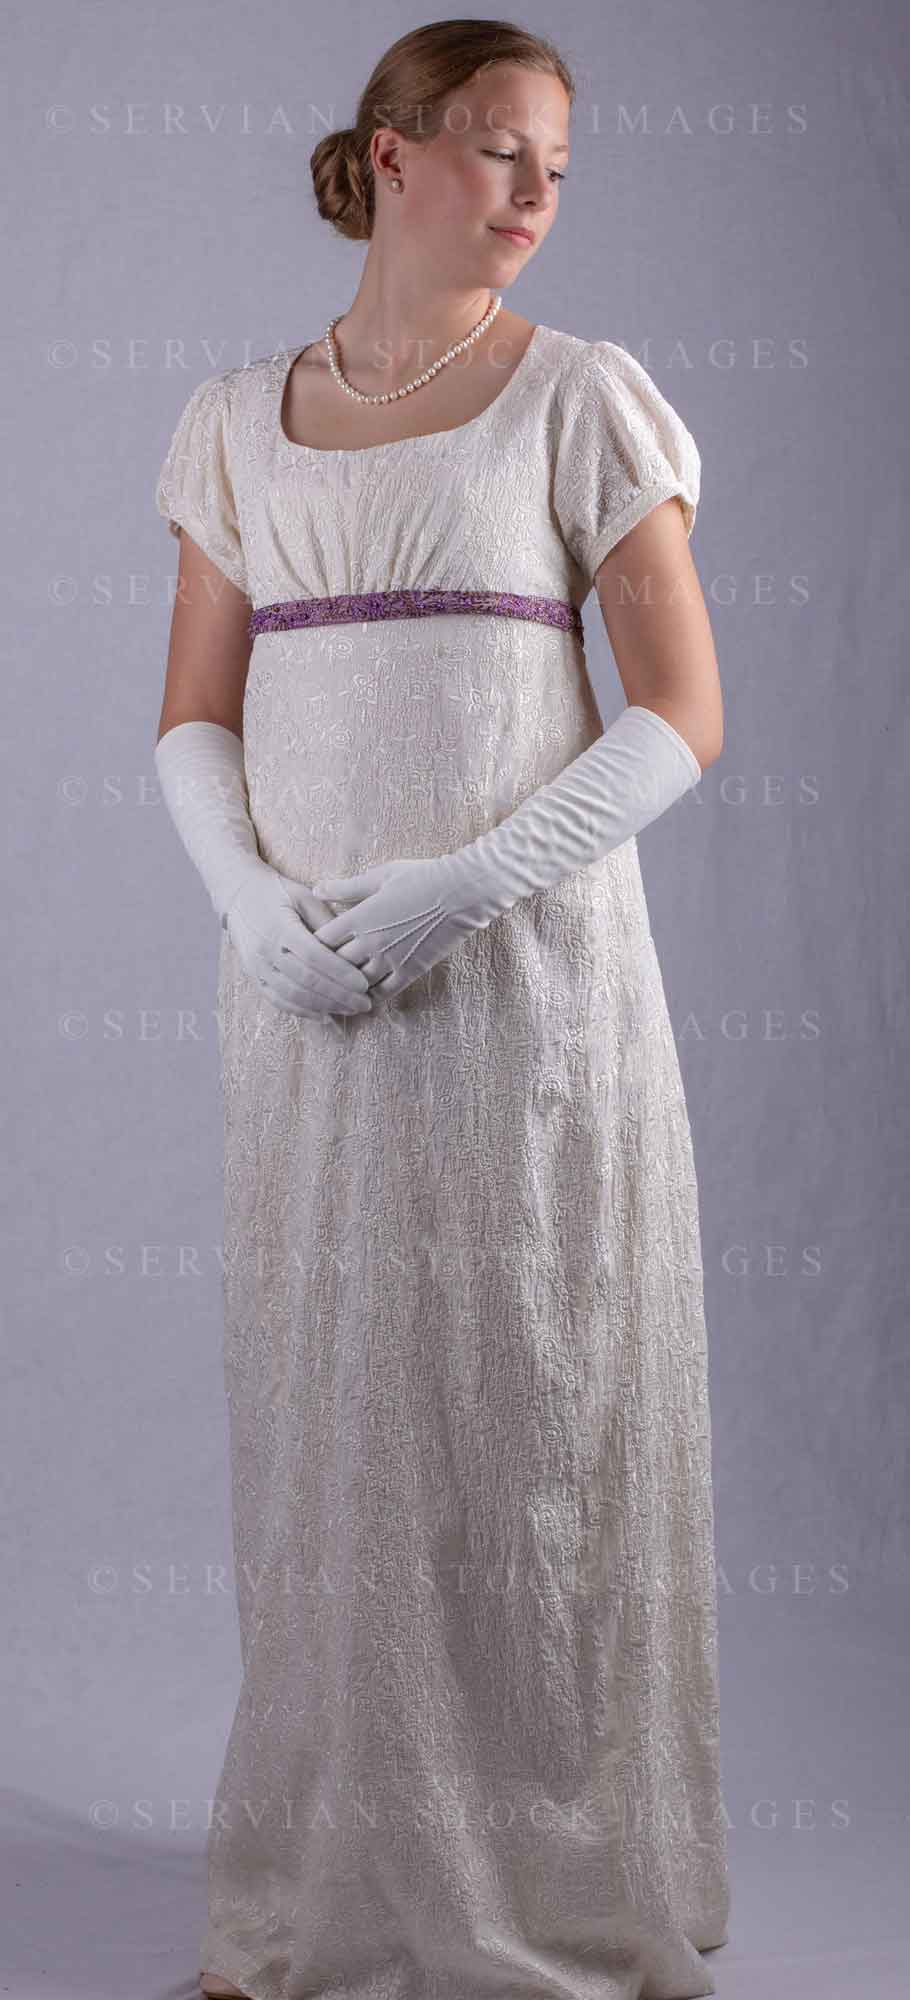 Regency woman in a cream embroidered dress and long gloves (Skye 0030)